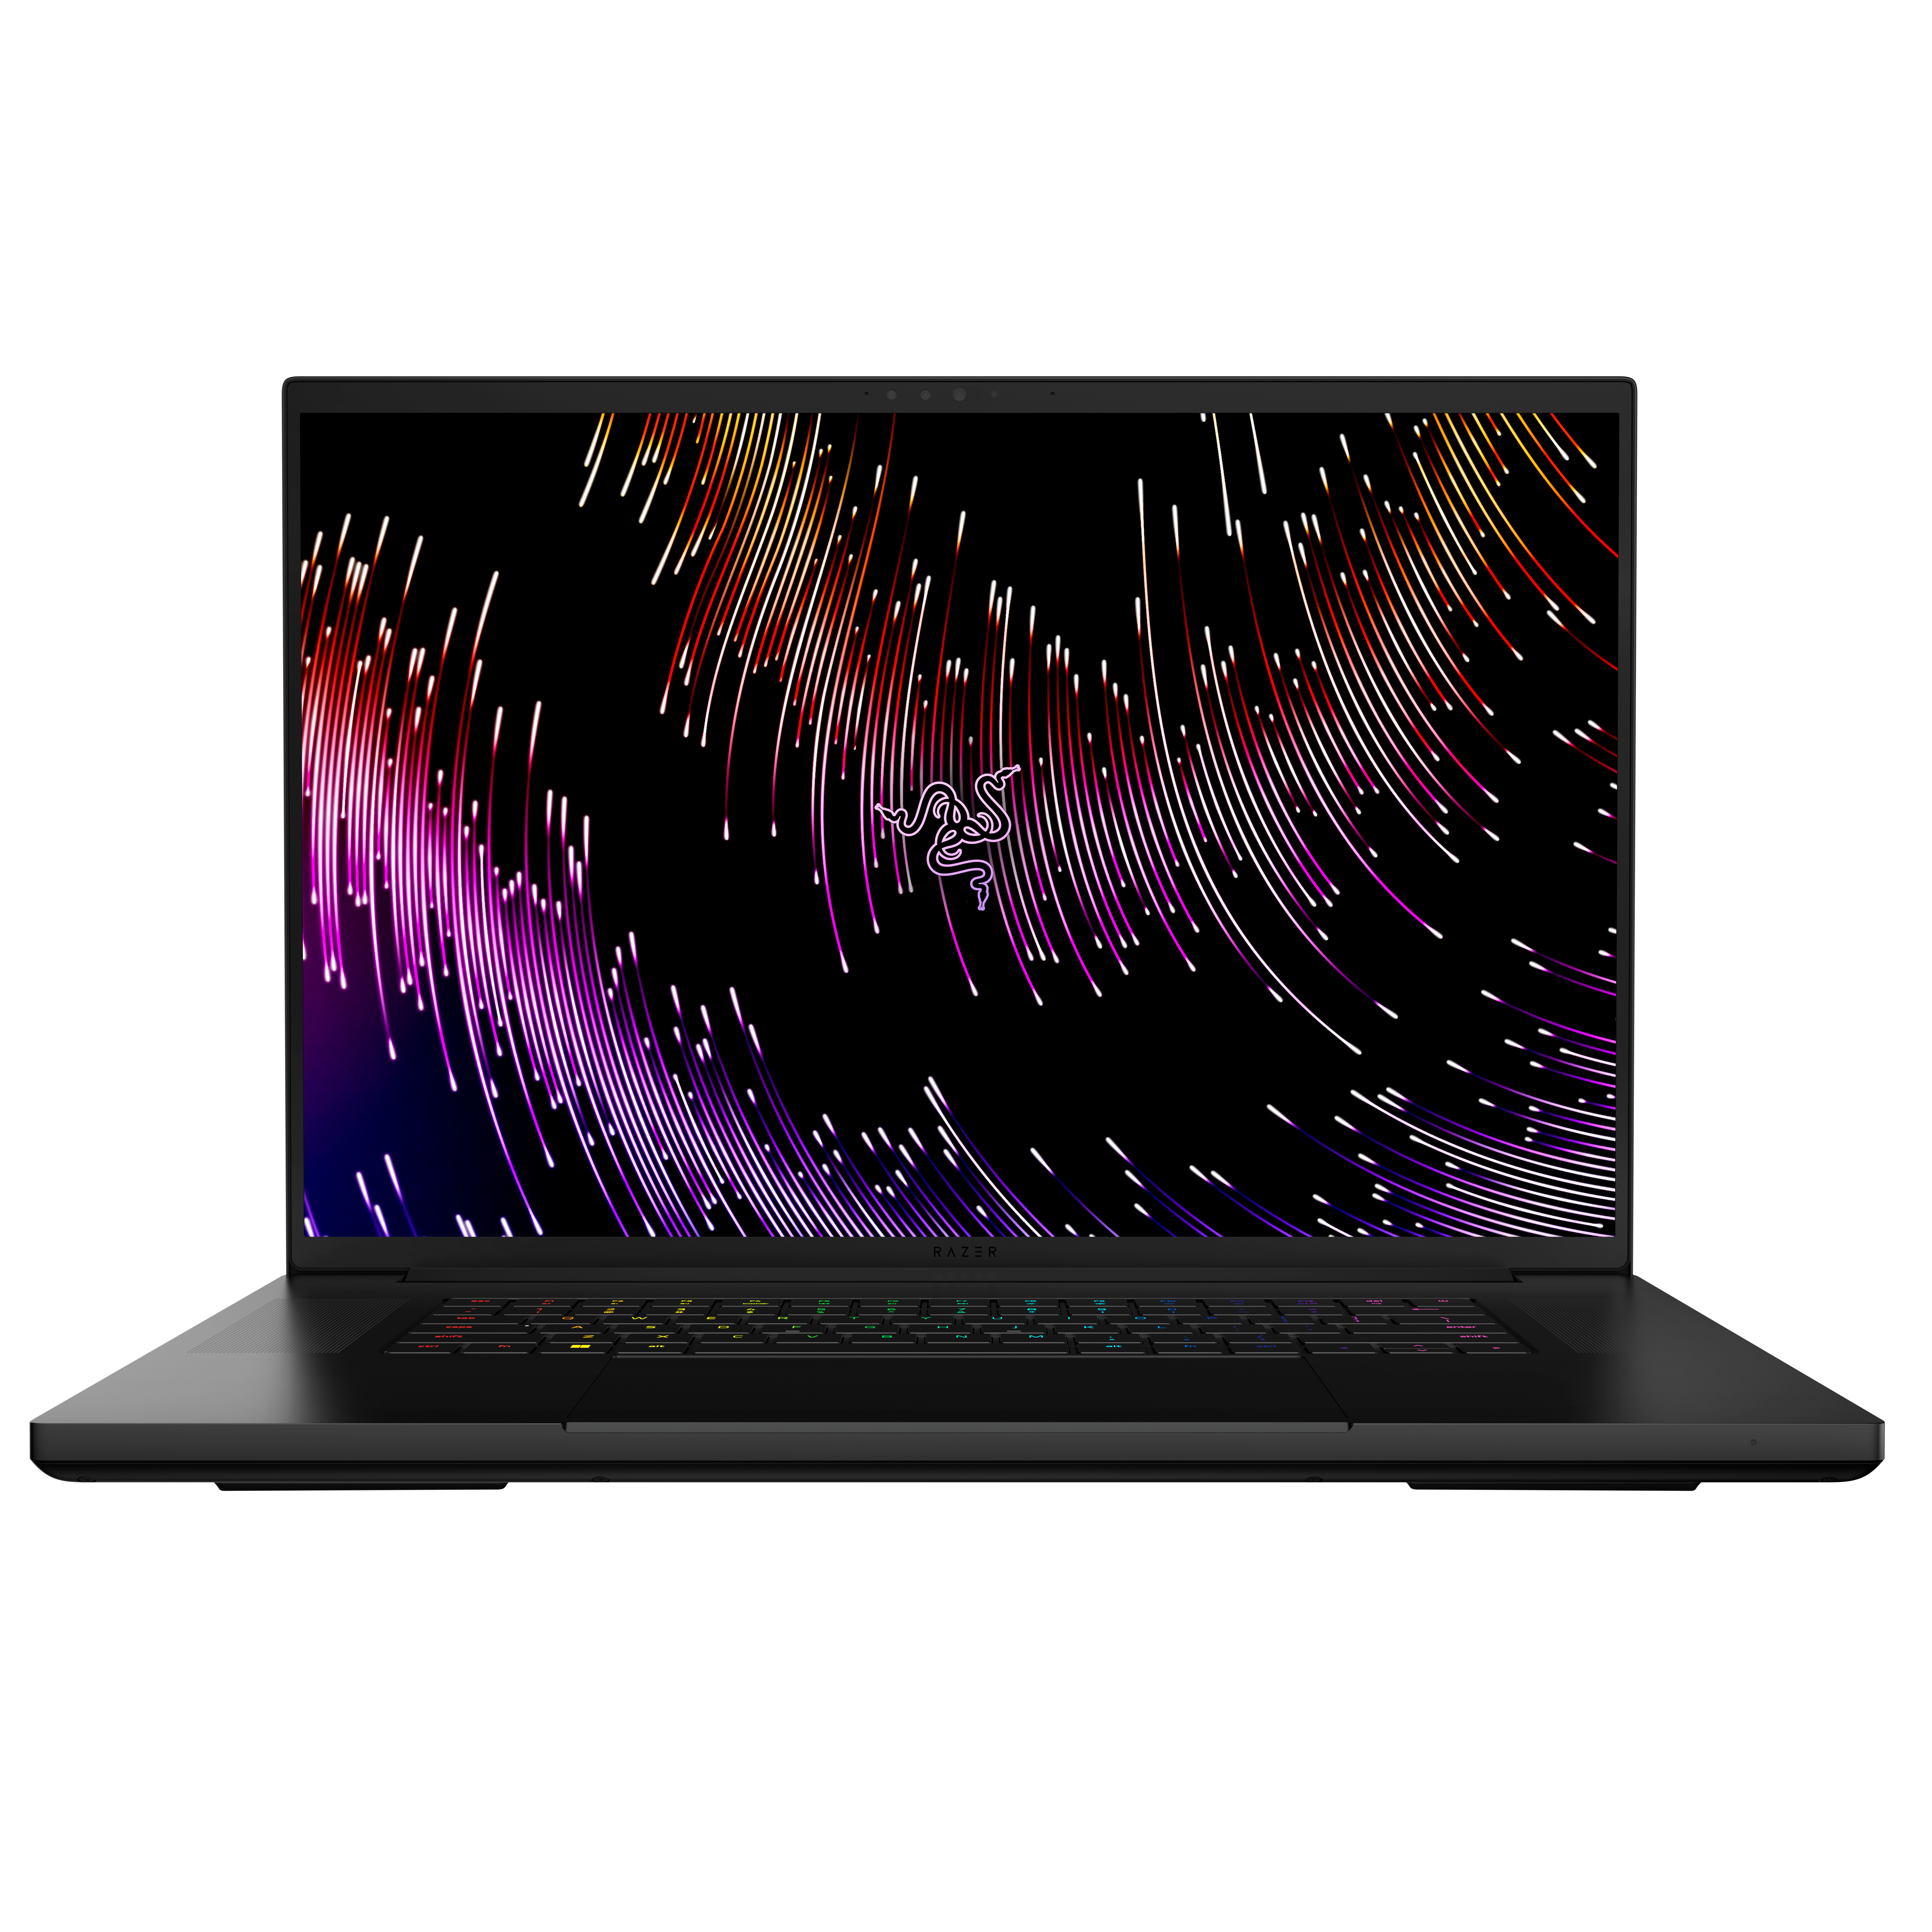 Front view of the Razer Blade 18